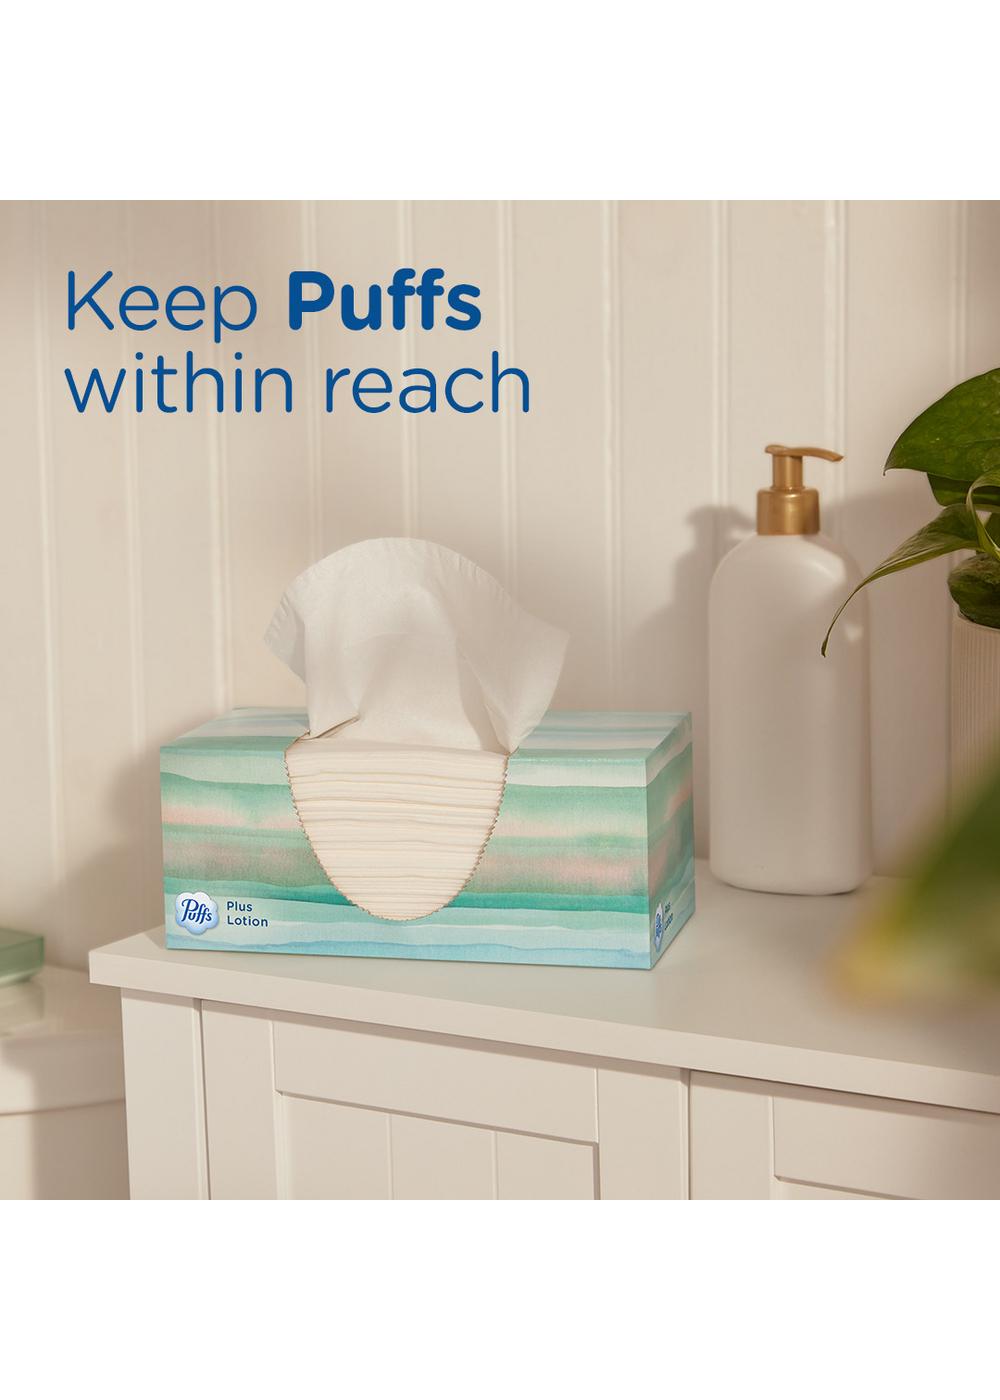 Puffs Plus Lotion Facial Tissues; image 3 of 5